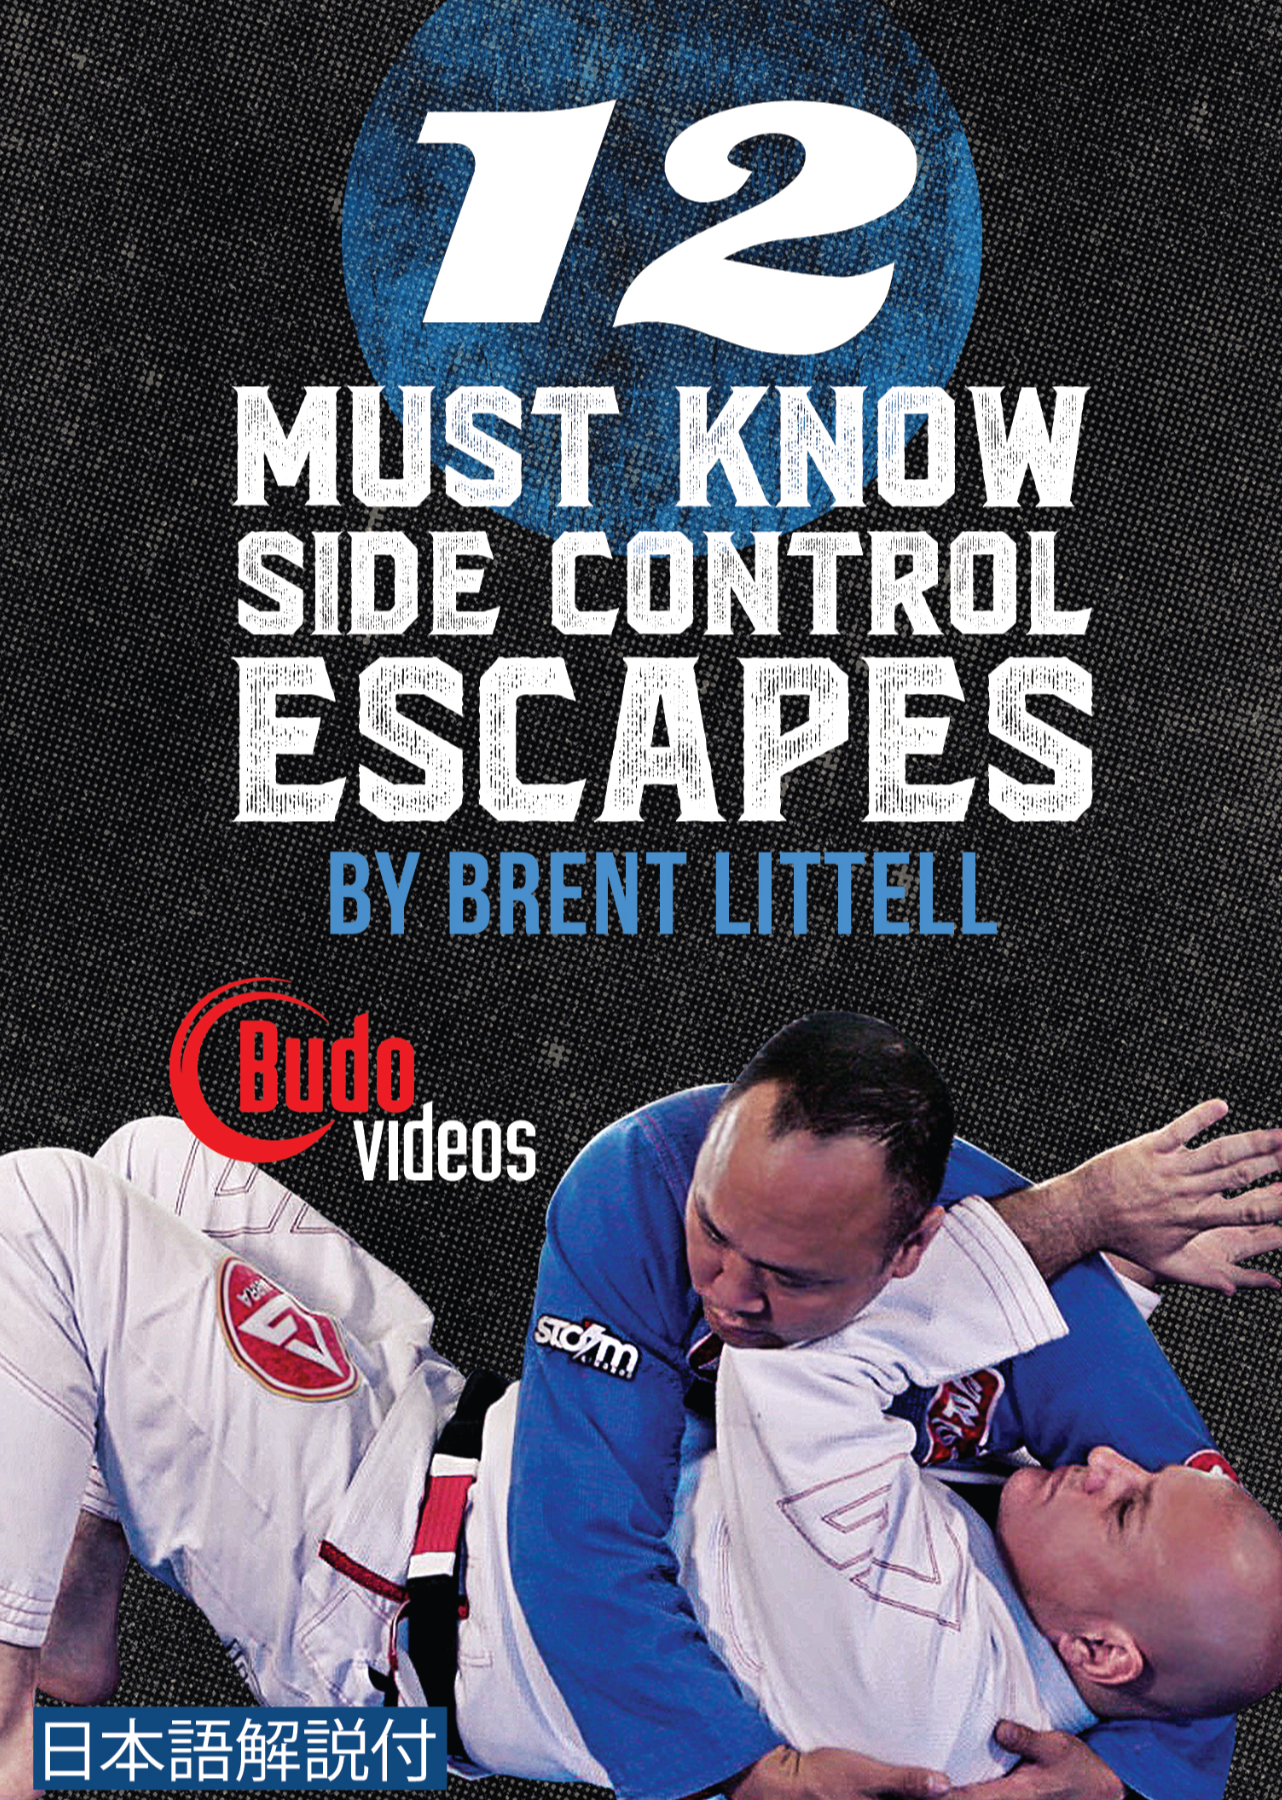 12 Must Know Side Control Escapes DVD or Blu-ray by Brent Littell - Budovideos Inc